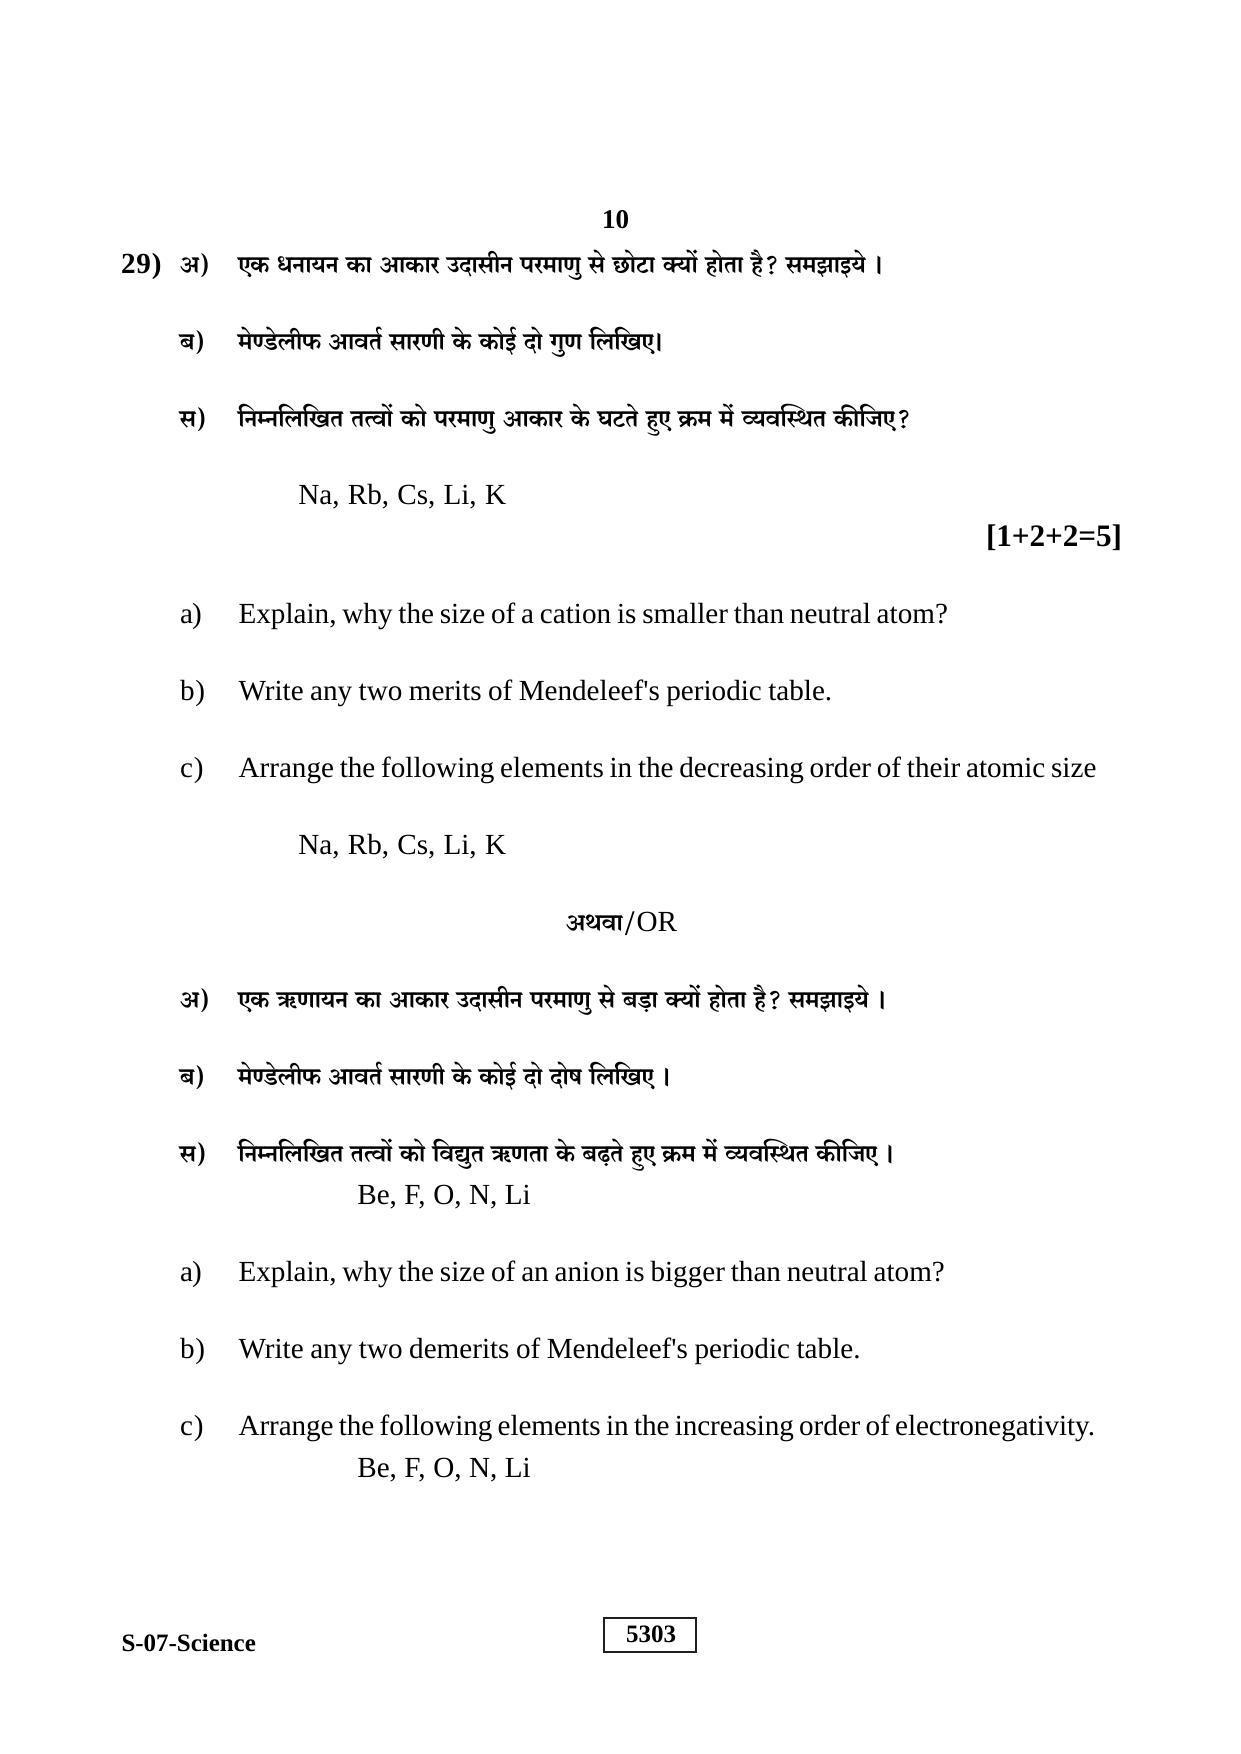 RBSE Class 10 Science 2020 Question Paper - Page 10